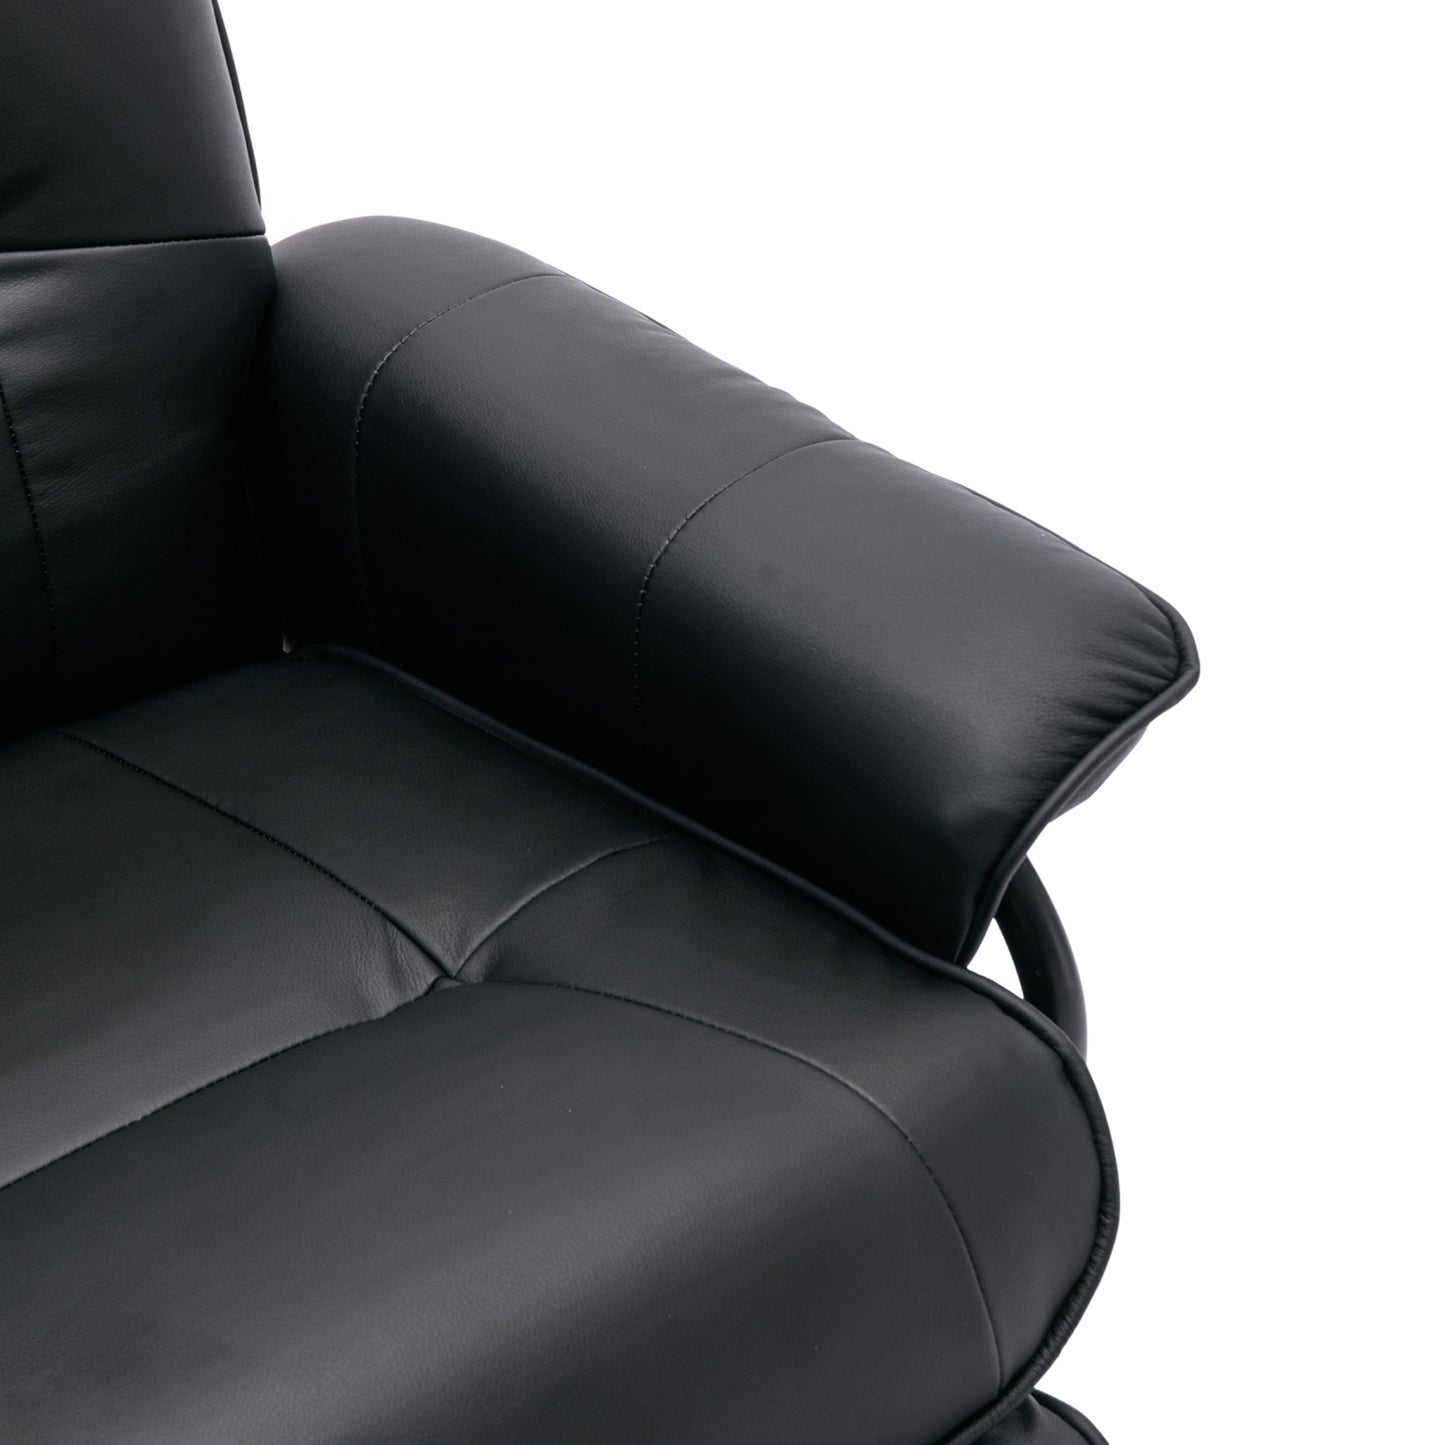 SwivelCraft 360: Luxe Faux Leather Recliner